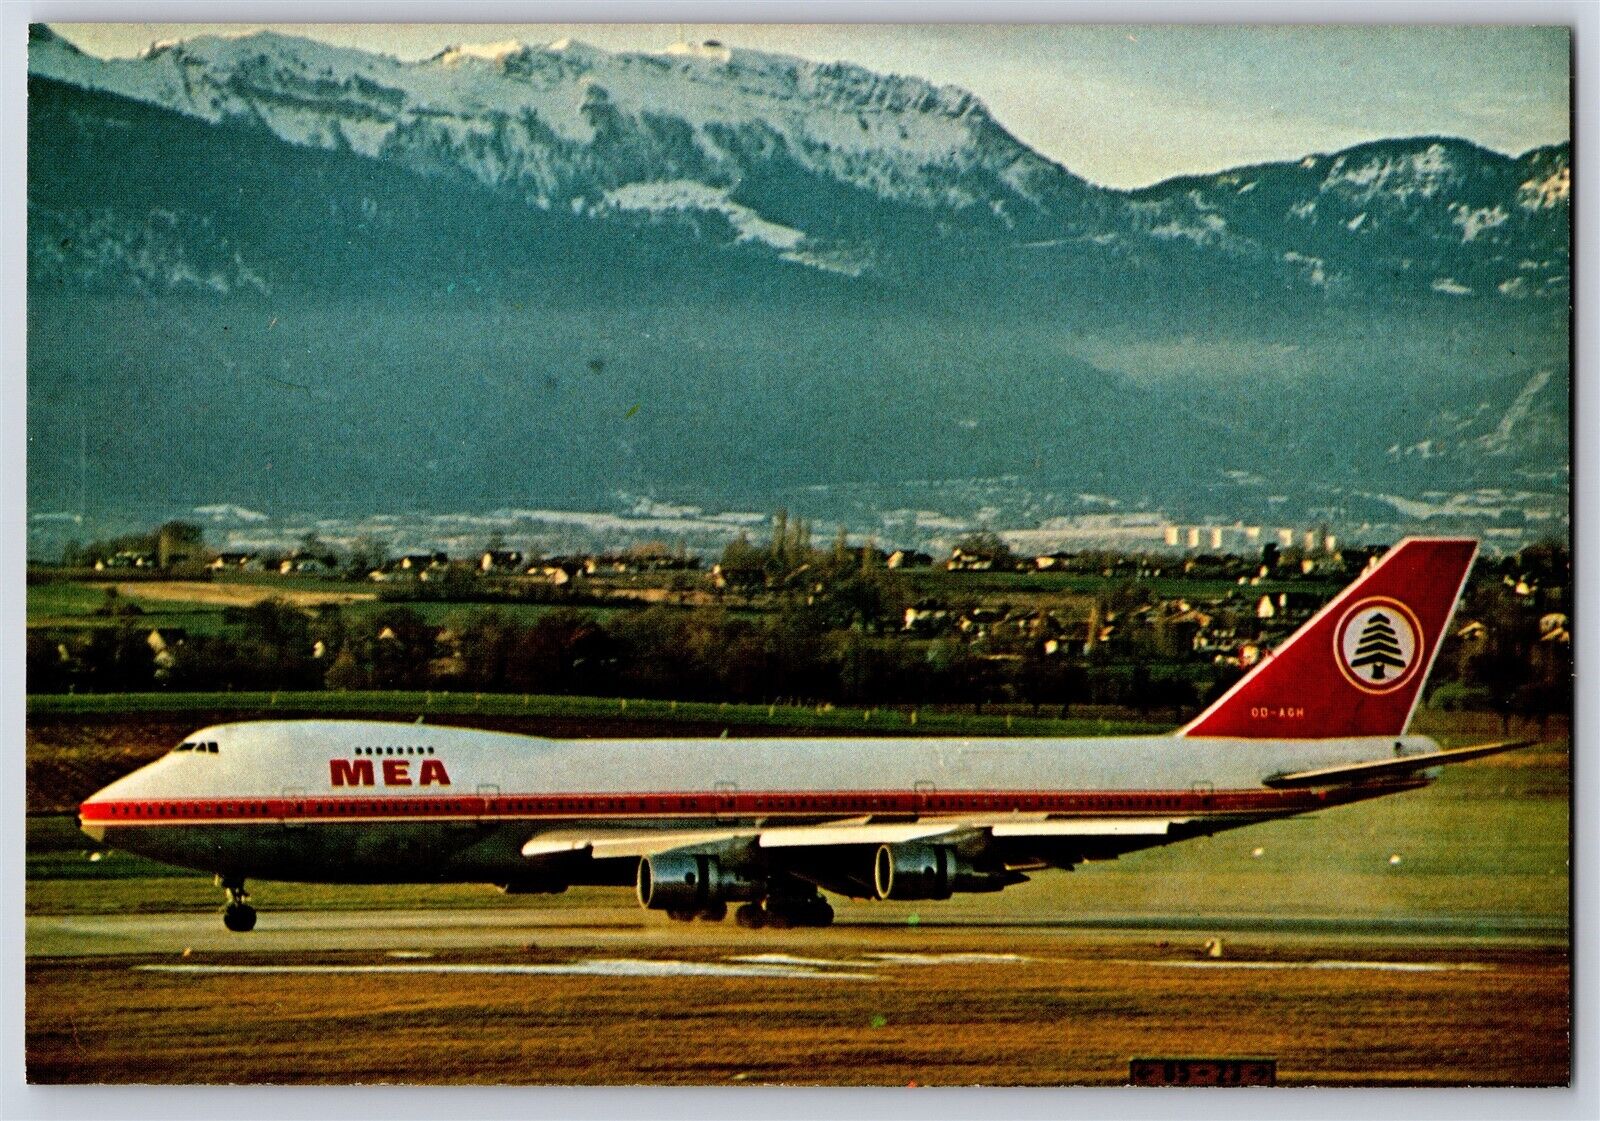 Airplane Postcard MEA Middle East Airlines Boeing 747-200B BN20